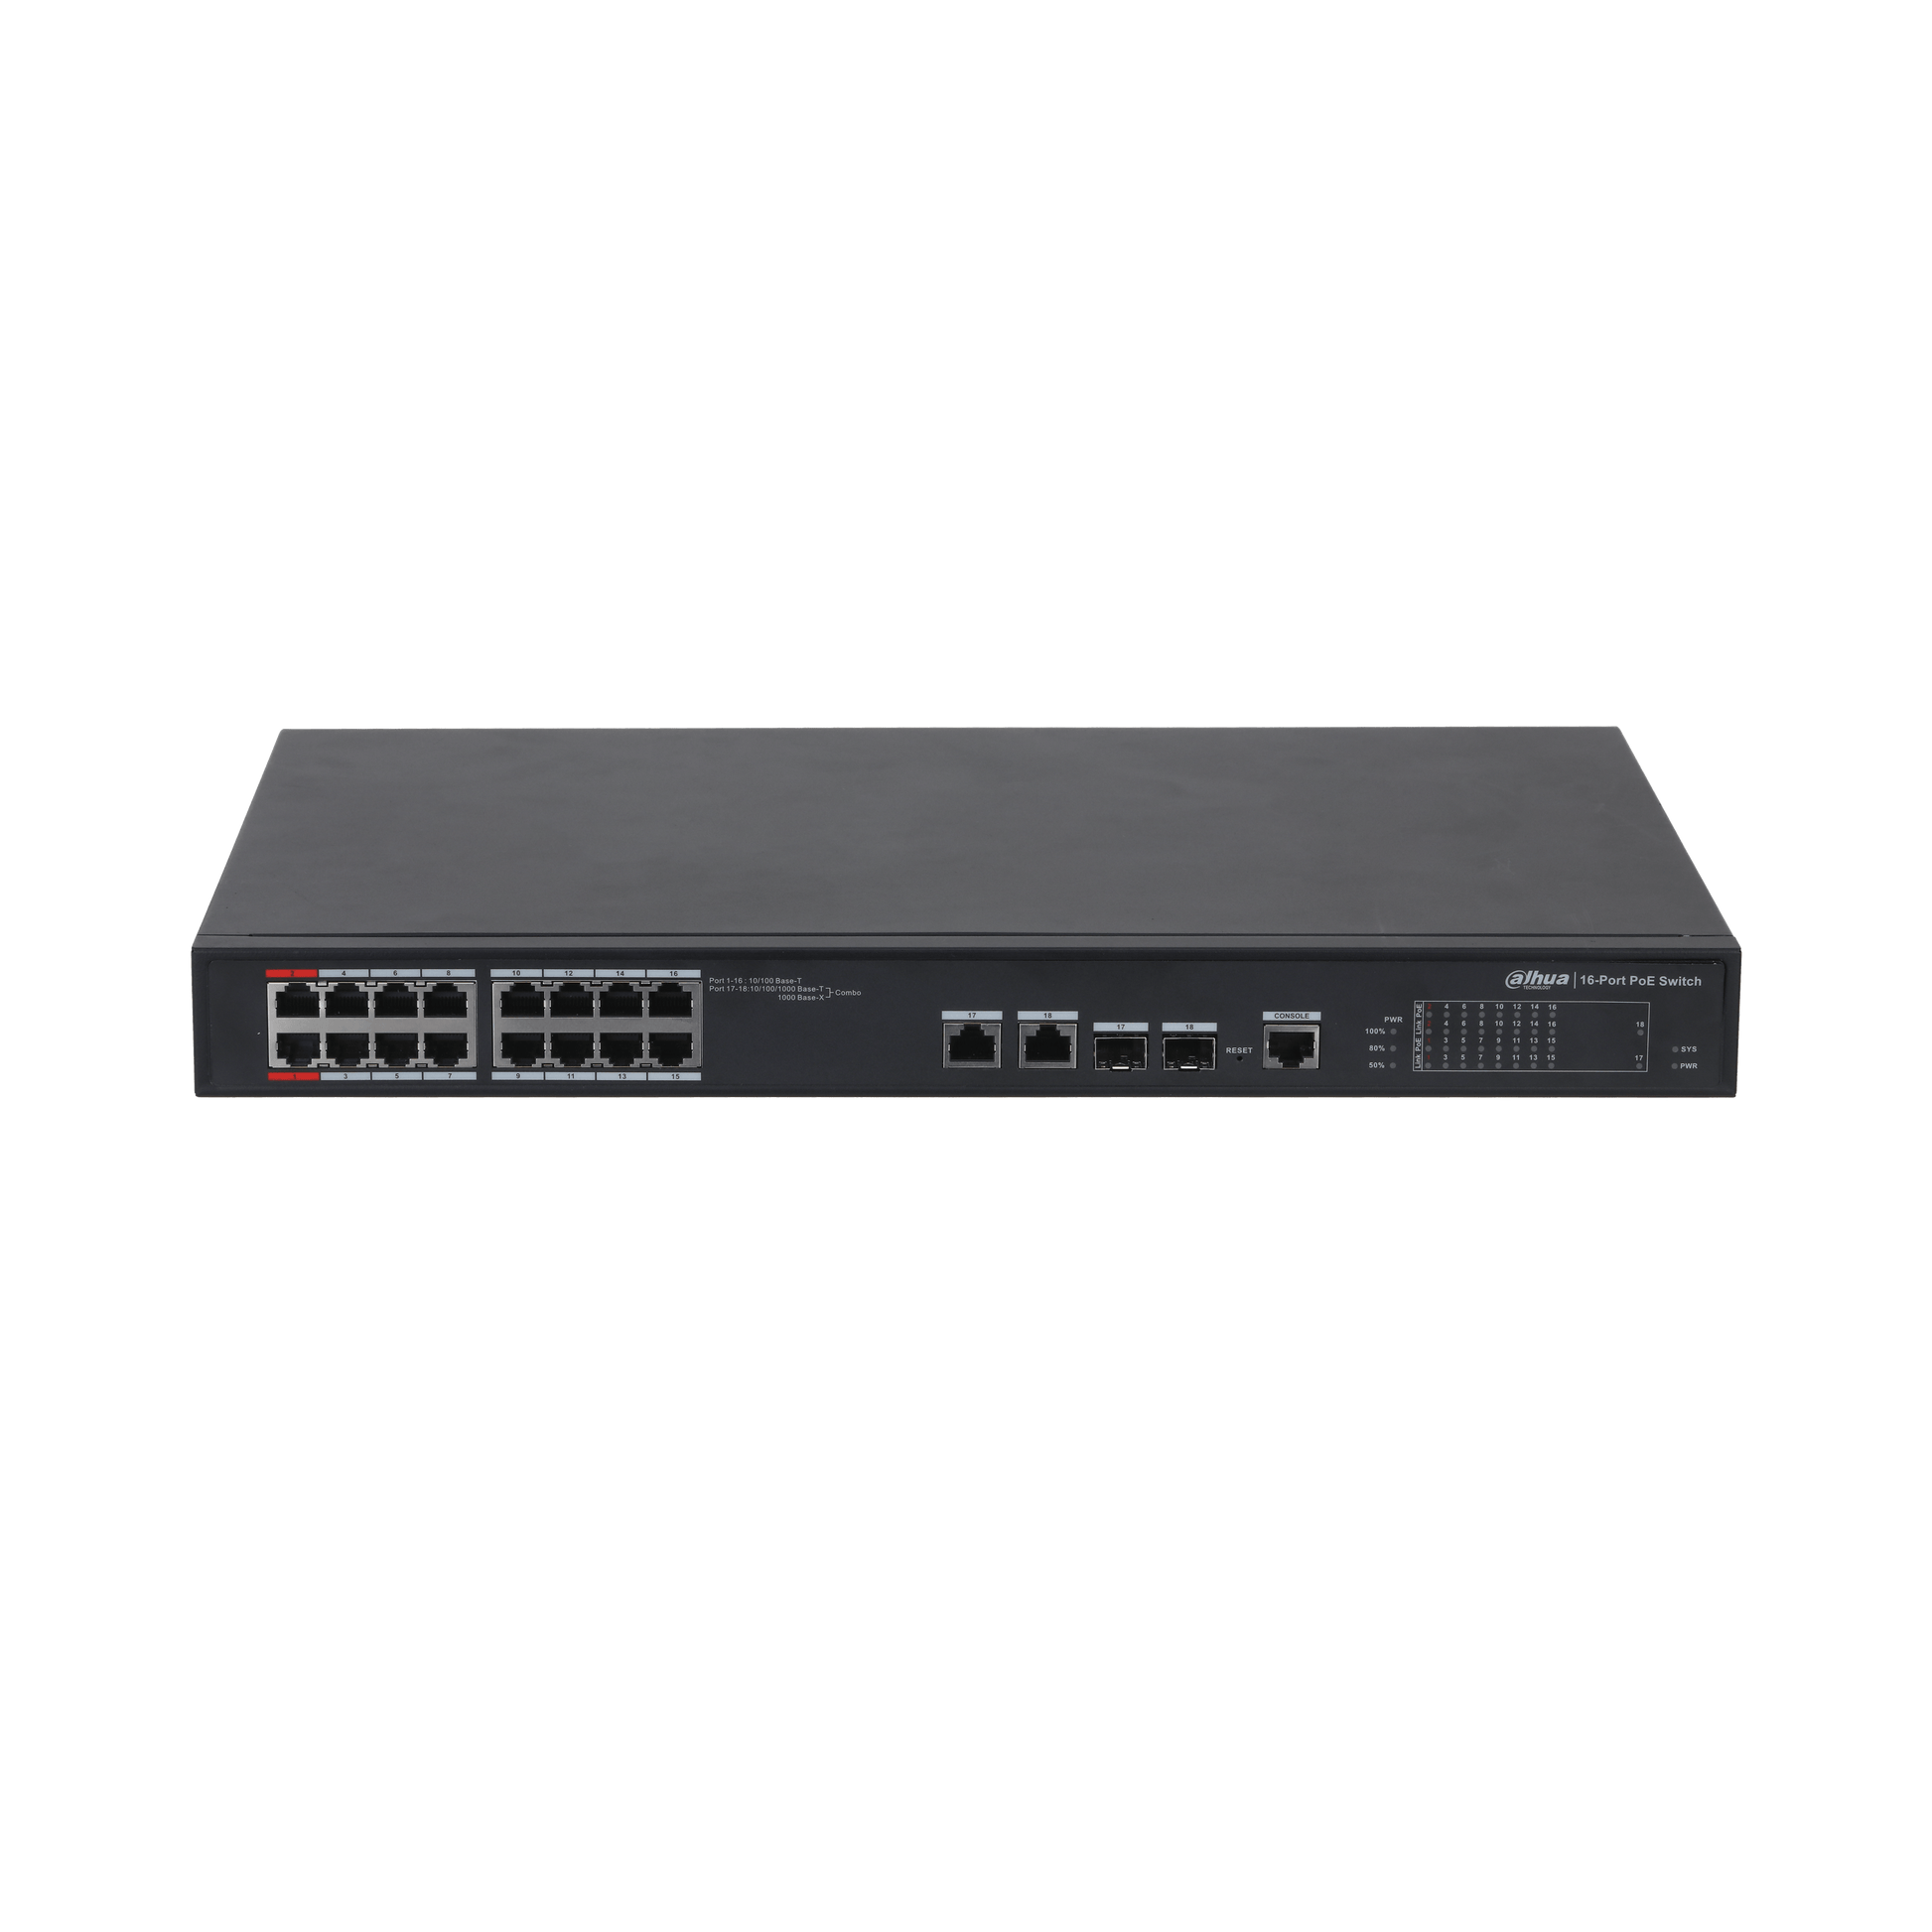 Dahua 16-port 100 Mbps + 2-port Gigabit Managed PoE Switch PFS4218-16ET-240 | dahua, Networking switches | Global Security Alarms